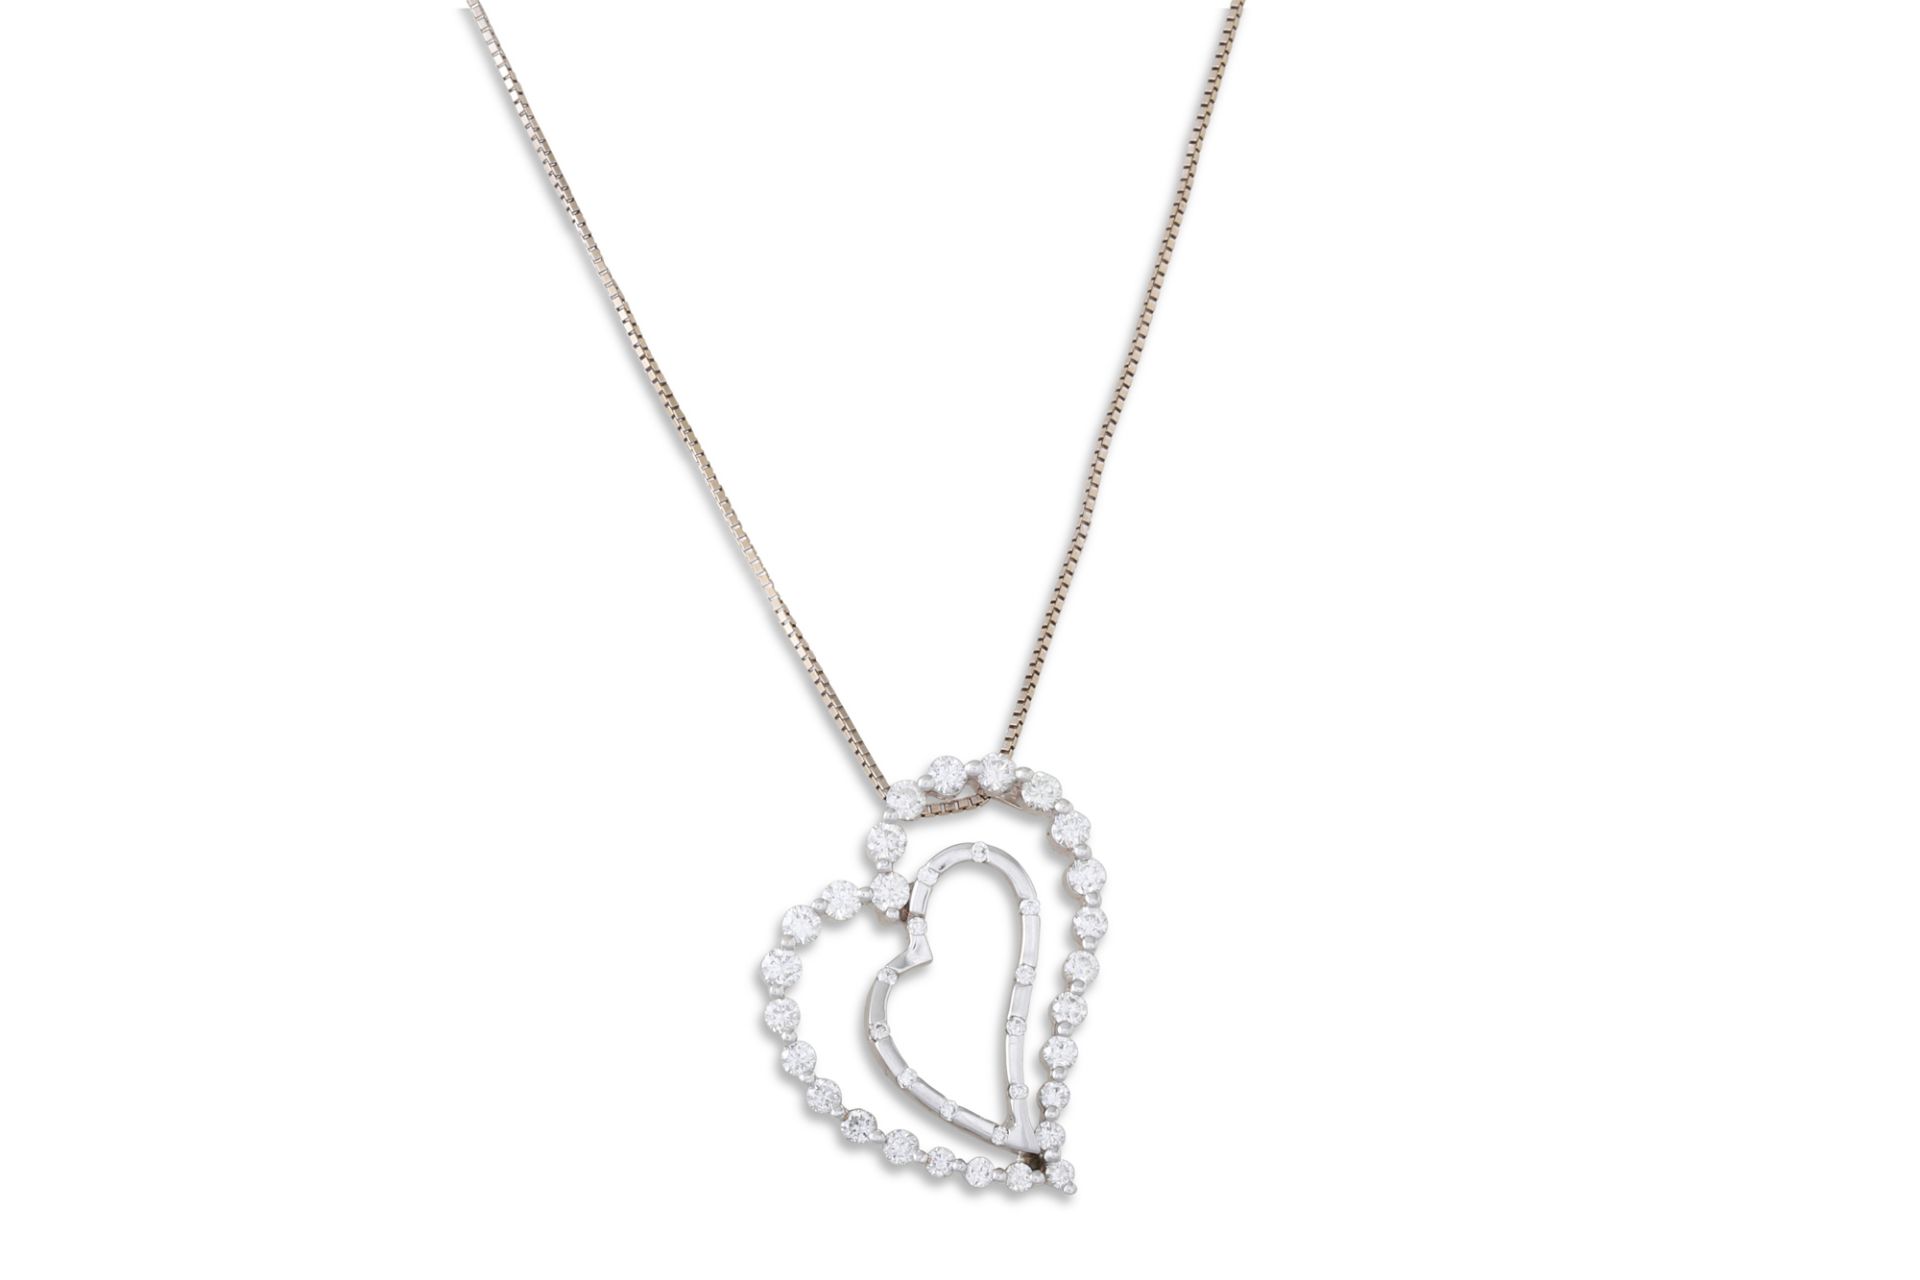 A DIAMOND PENDANT, the heart shaped pendant mounted in 18ct white gold, on a white gold chain.